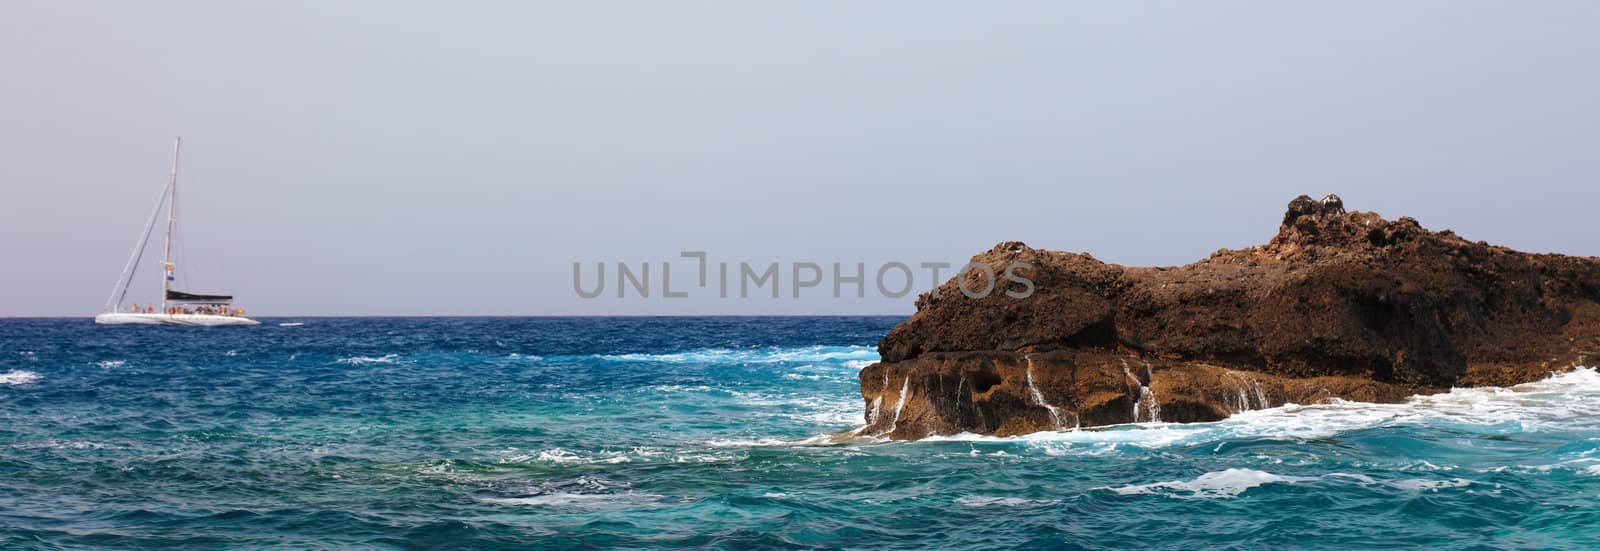 Panoramic view of sailing boat and rock near Tenerife, Canary Islands.